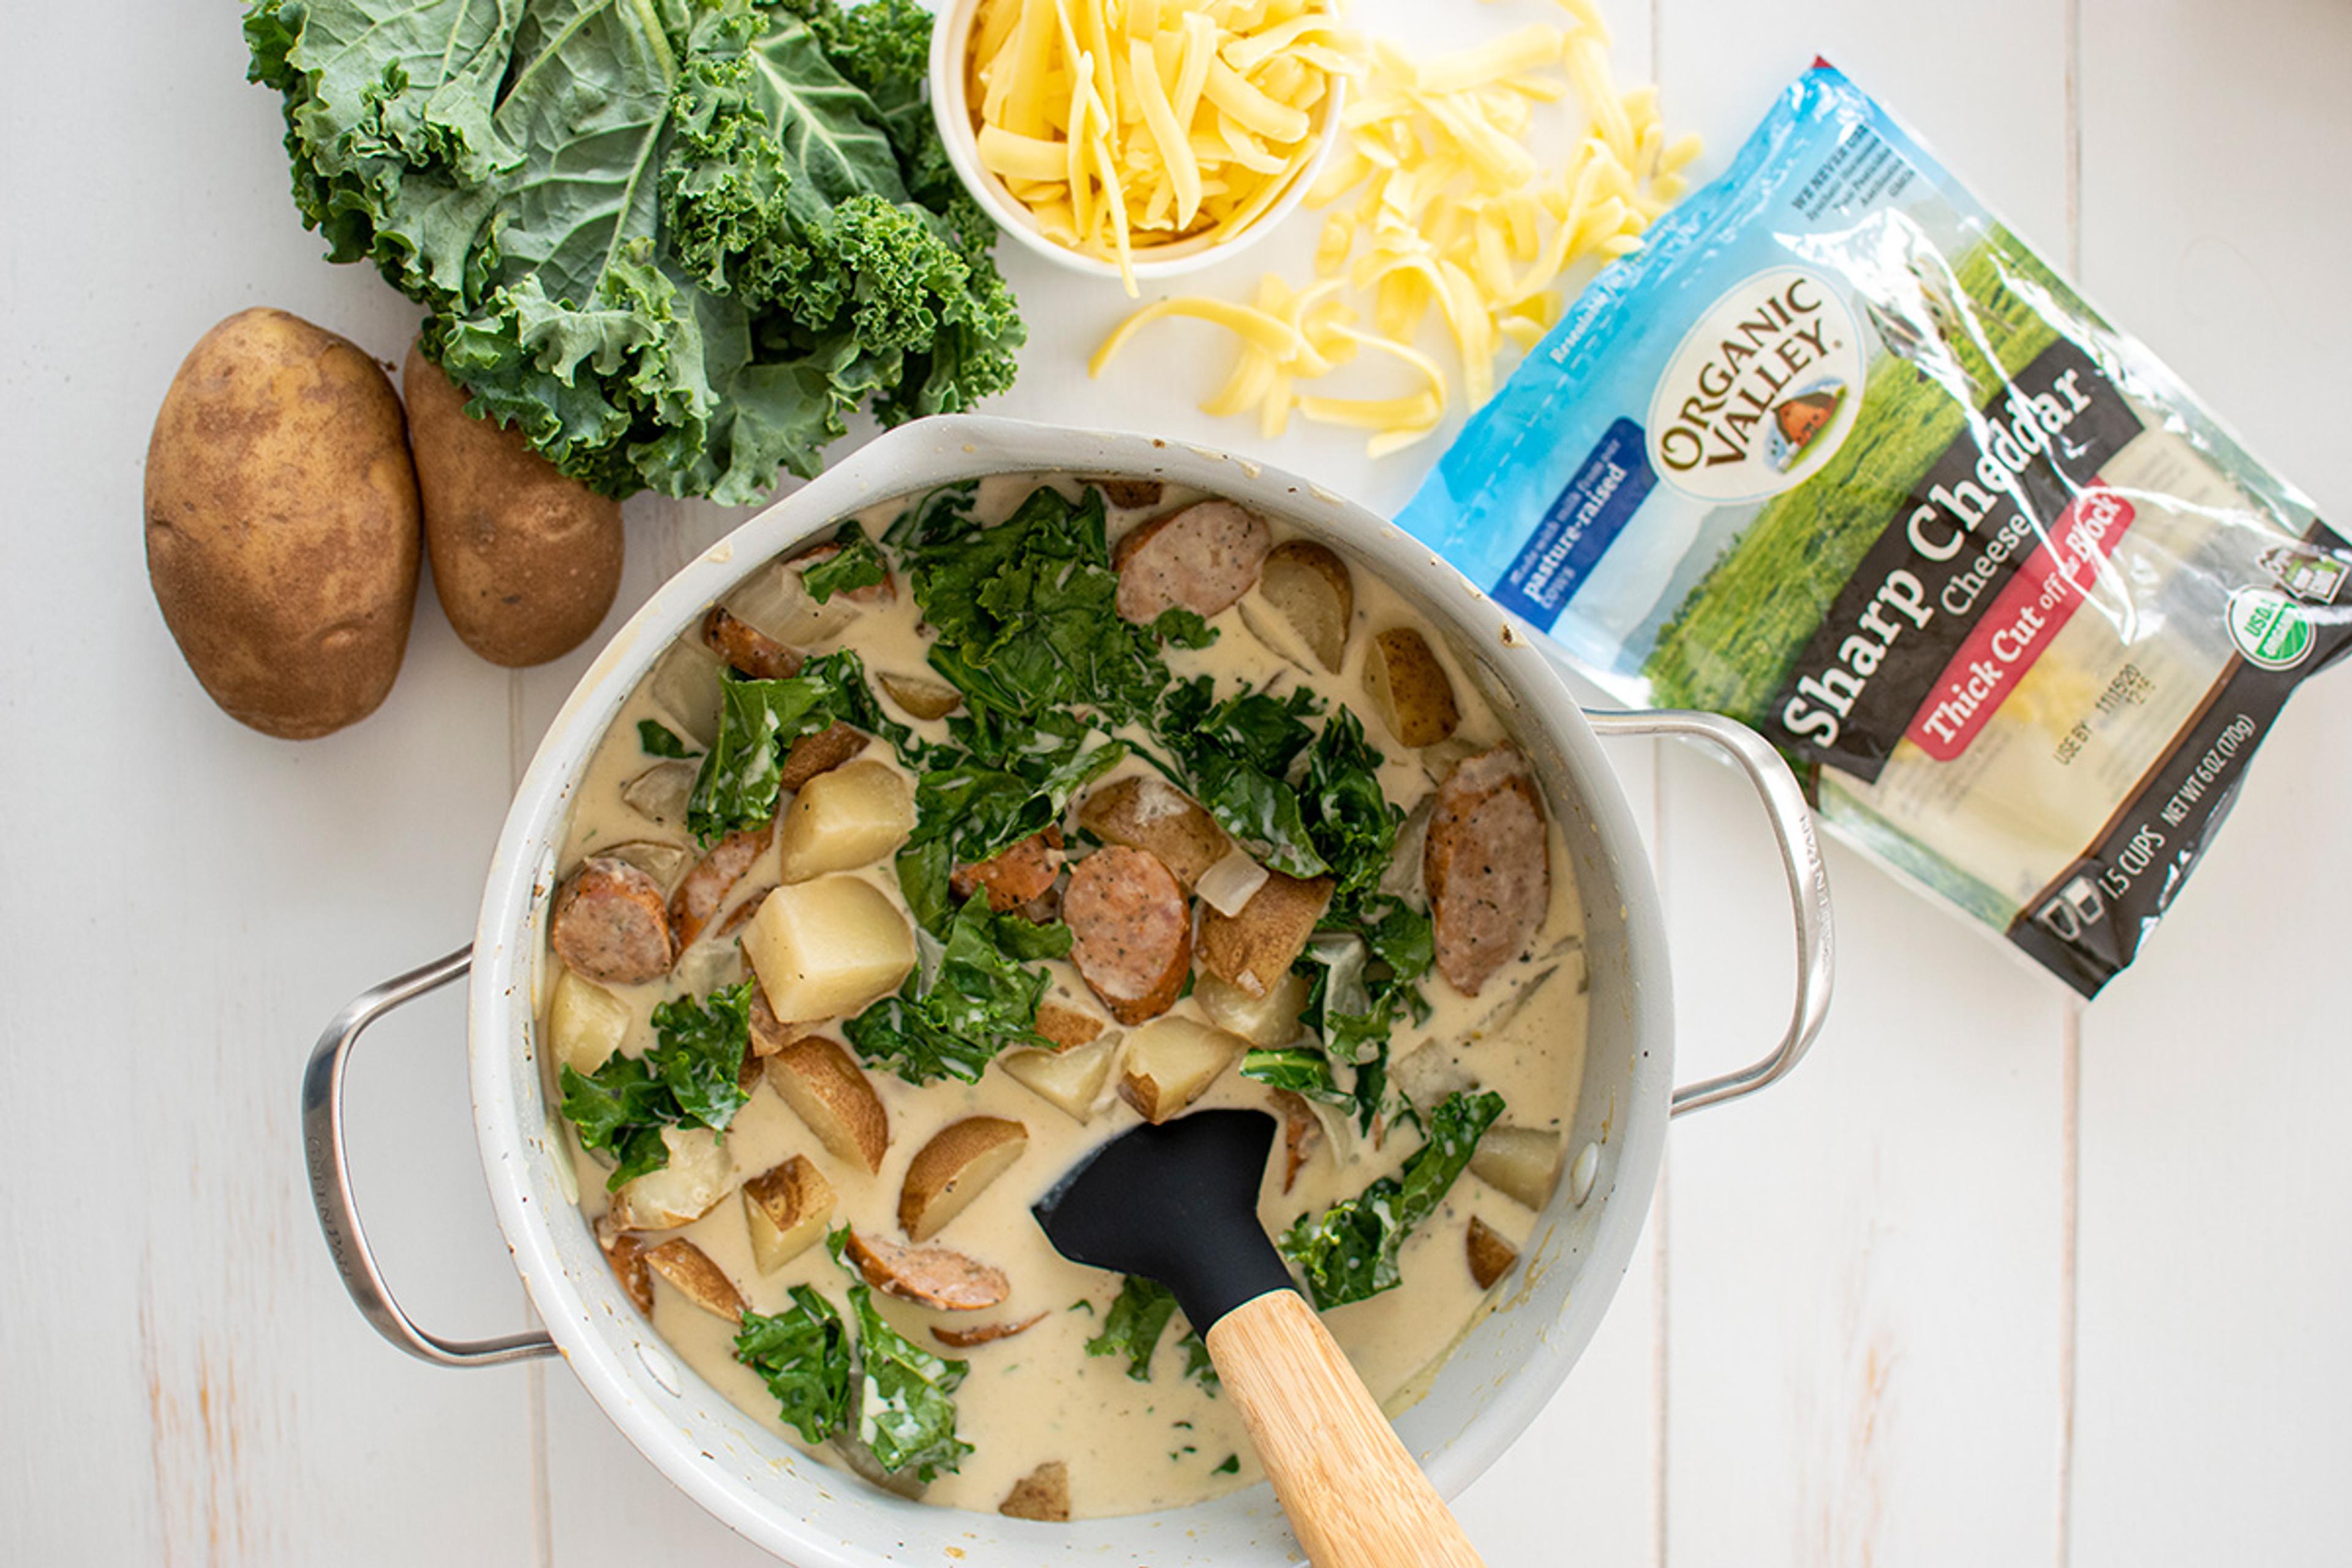 Creamy sausage potato and kale soup with thick-cut sausage, potato chunks, and wilted kale topped with shredded cheese.